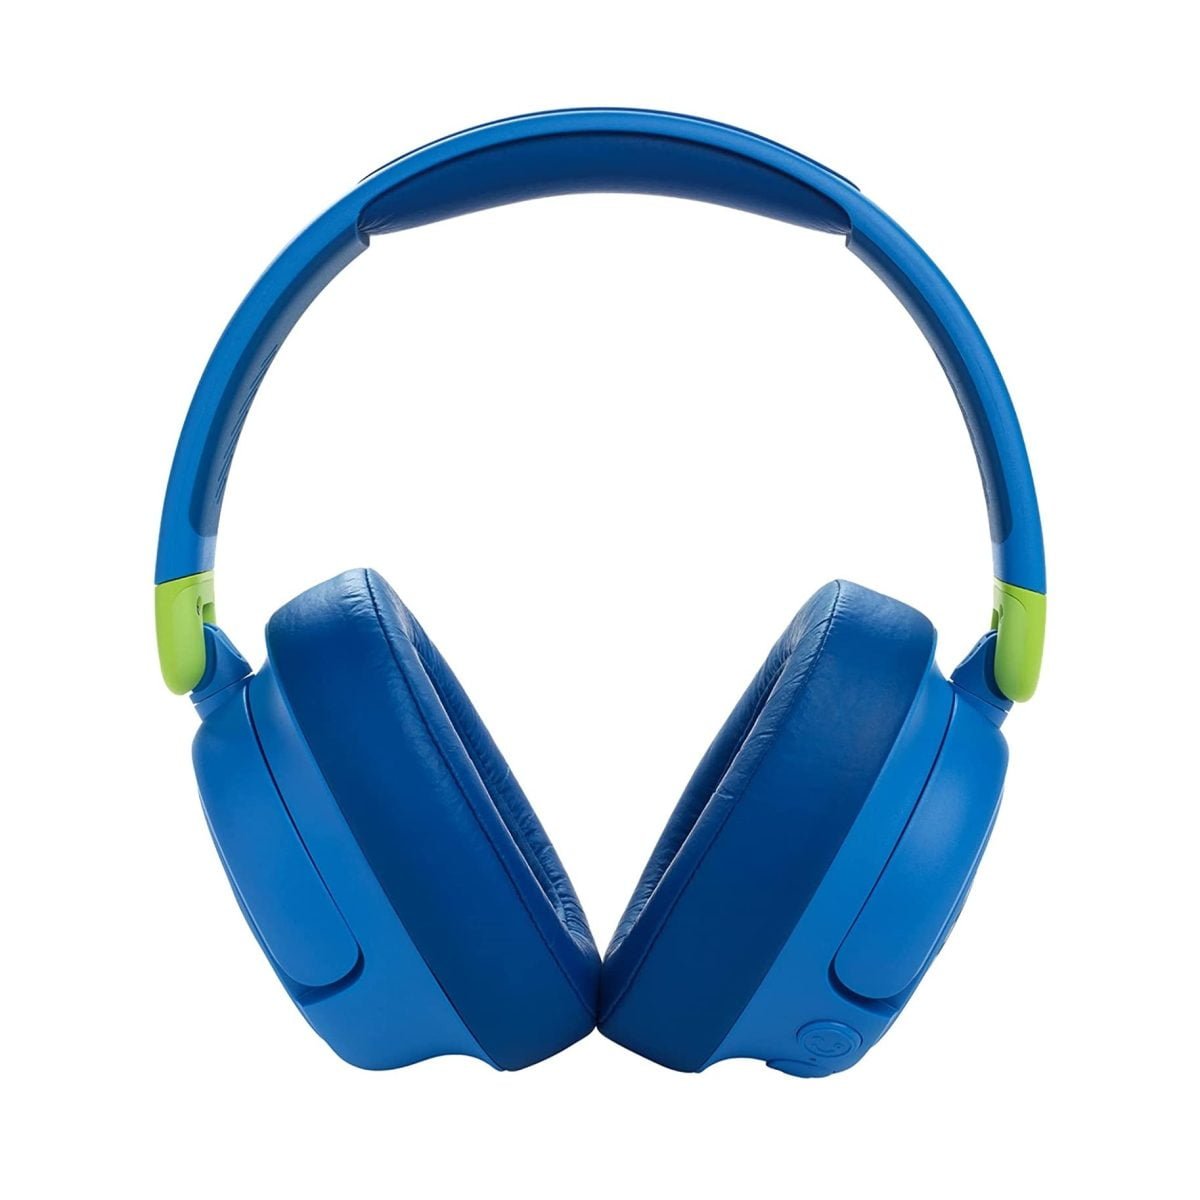 61Pjtqjdjl. Ac Sl1500 Jbl &Lt;H1&Gt;Jbl Jr460Nc On-Ear Wireless Headphones For Kids, Blue&Lt;/H1&Gt;
Https://Www.youtube.com/Watch?V=Mdaicwkv4Pg Quality Sound Has No Age, But You Want To Be Sure Your Kids Are Safe While Having Fun. With A Maximum Volume Set Under 85Db, They’re Free To Enjoy Jbl Quality Sound, Safely. Shut Out All That Noise And Distraction With Active Noise Cancelling. Your Kids Can Stay Focused Whether They’re Listening To Music, Enjoying Their Favorite Show Or Learning Online. Help Your Kids Stay Connected To The World With The Built-In Mic. They Can Chat Easily With Friends And Family During Downtime, Or Teachers While They’re Busy Learning. Jbl Headphone Jbl Jr460Nc On-Ear Wireless Headphones For Kids, Blue